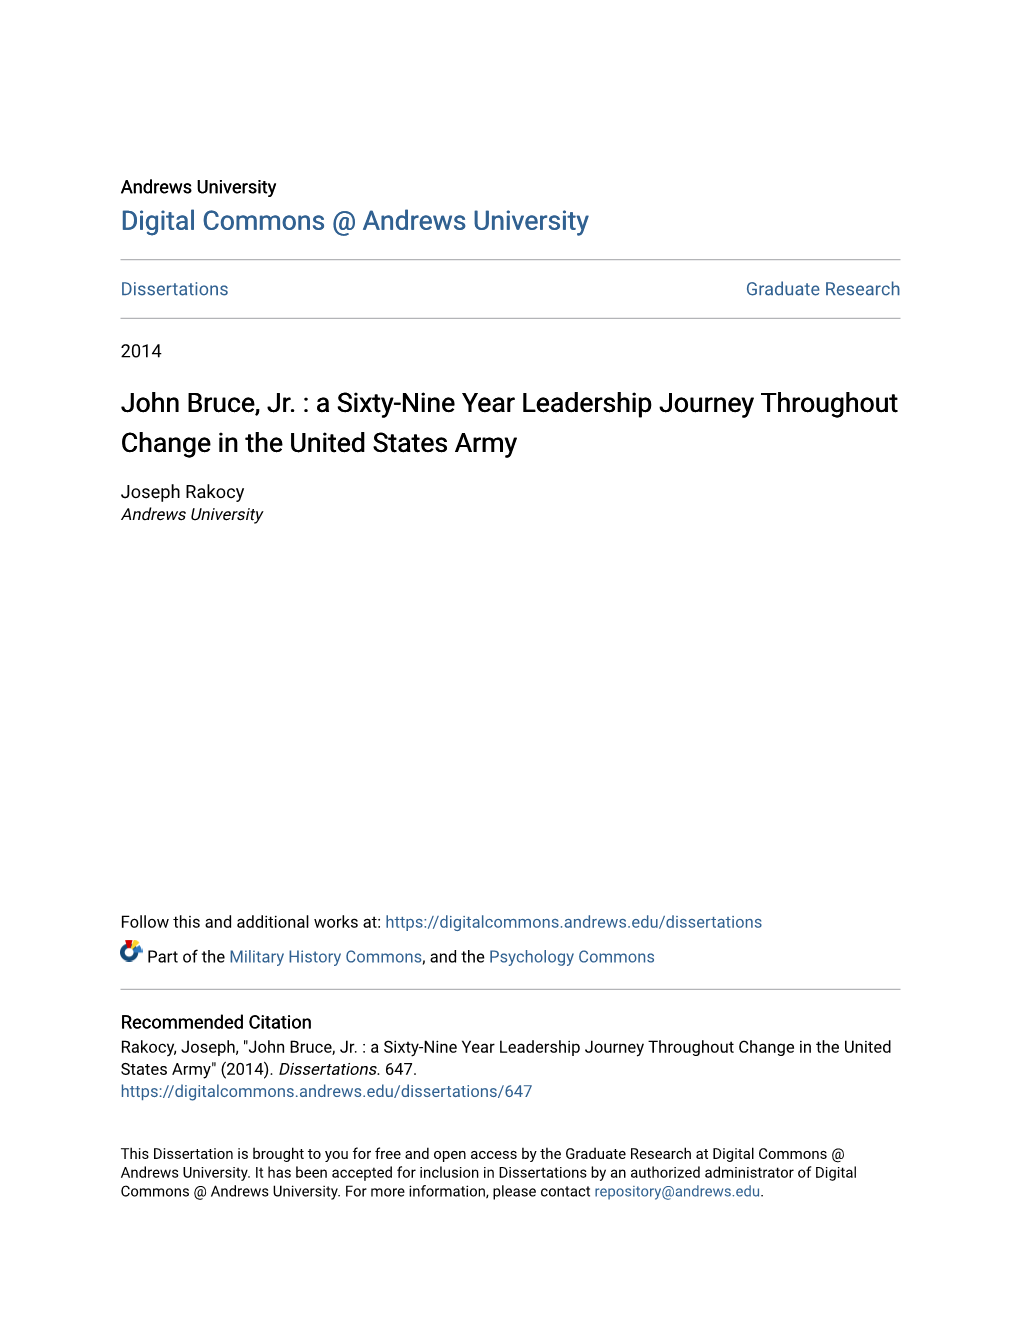 John Bruce, Jr. : a Sixty-Nine Year Leadership Journey Throughout Change in the United States Army